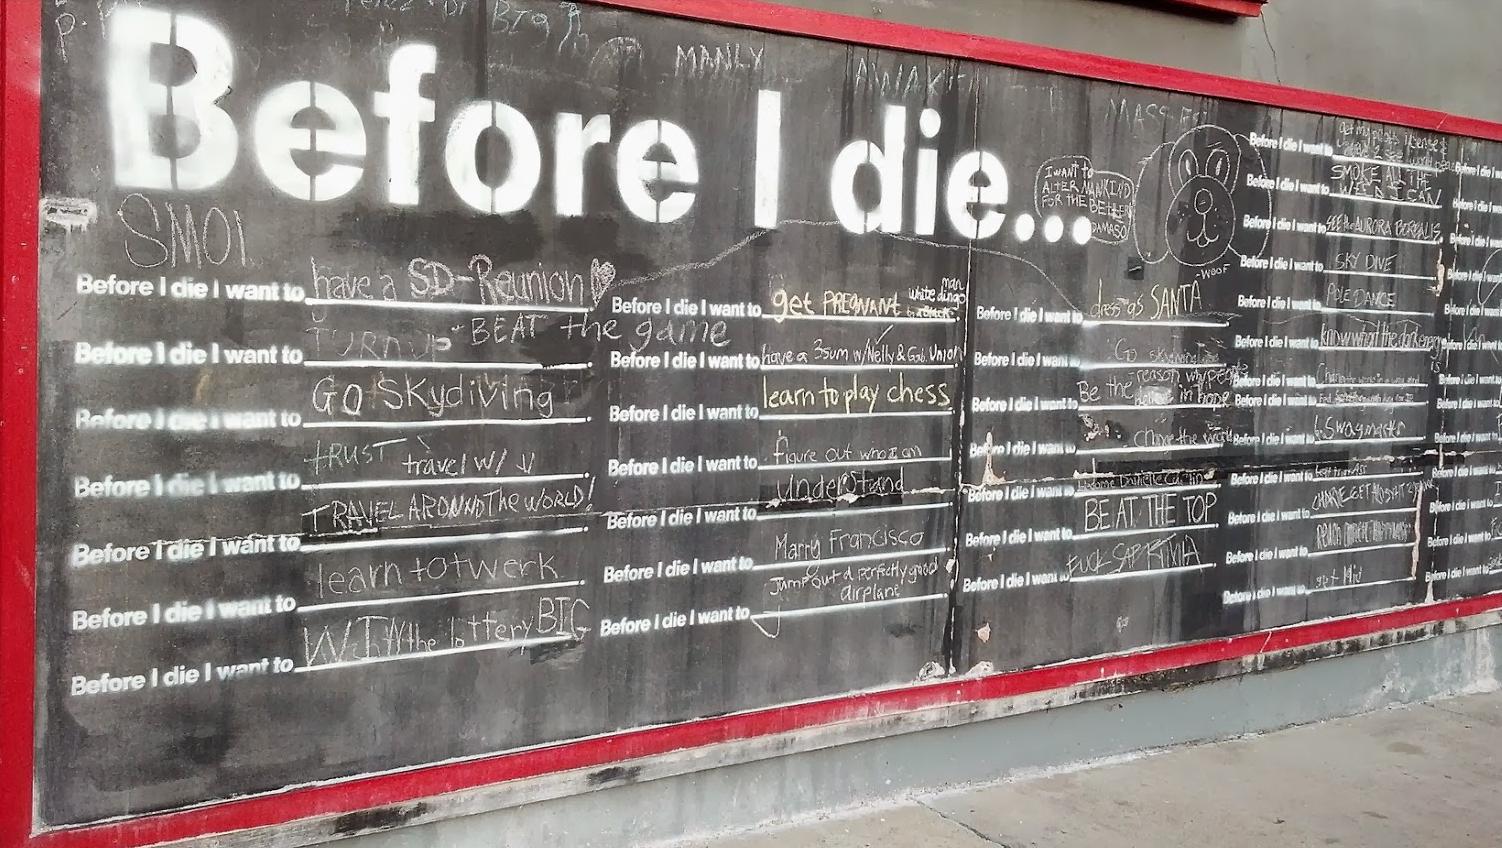 Before I die wall, Sziget, 2012